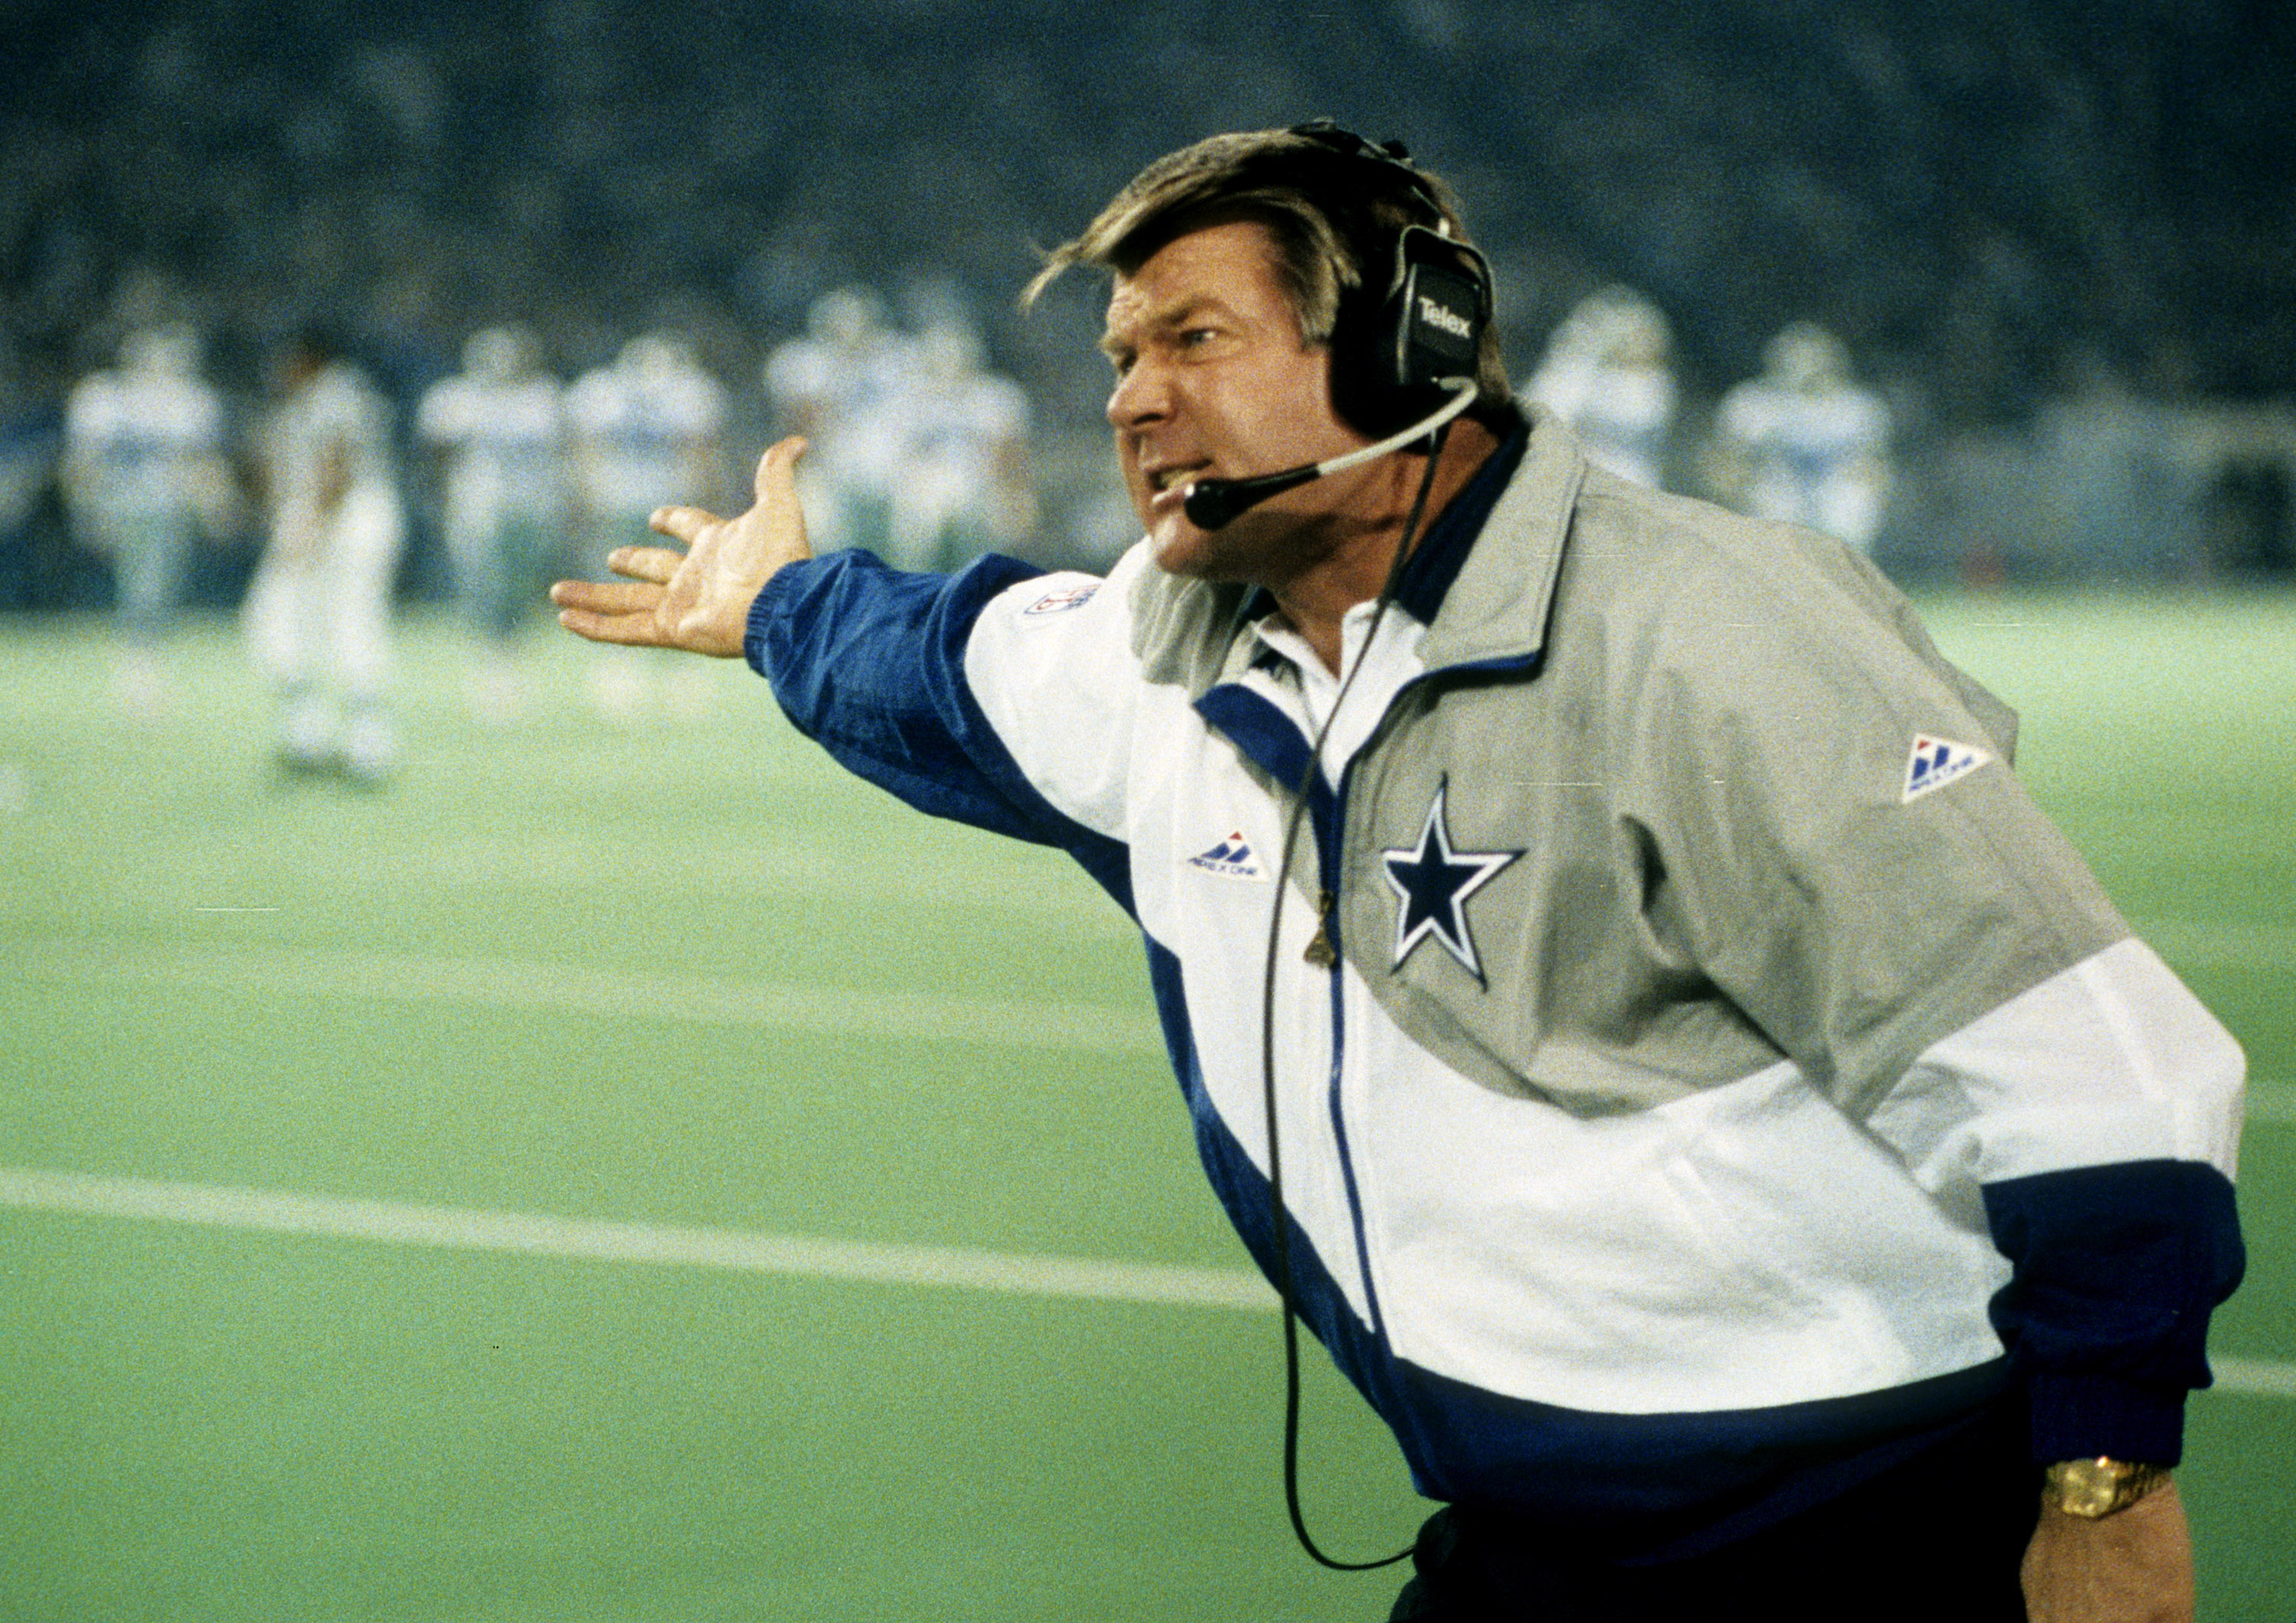 Troy Aikman Describes the Hilarious Way He and Jimmy Johnson Played Good Cop/Bad Cop With the Cowboys